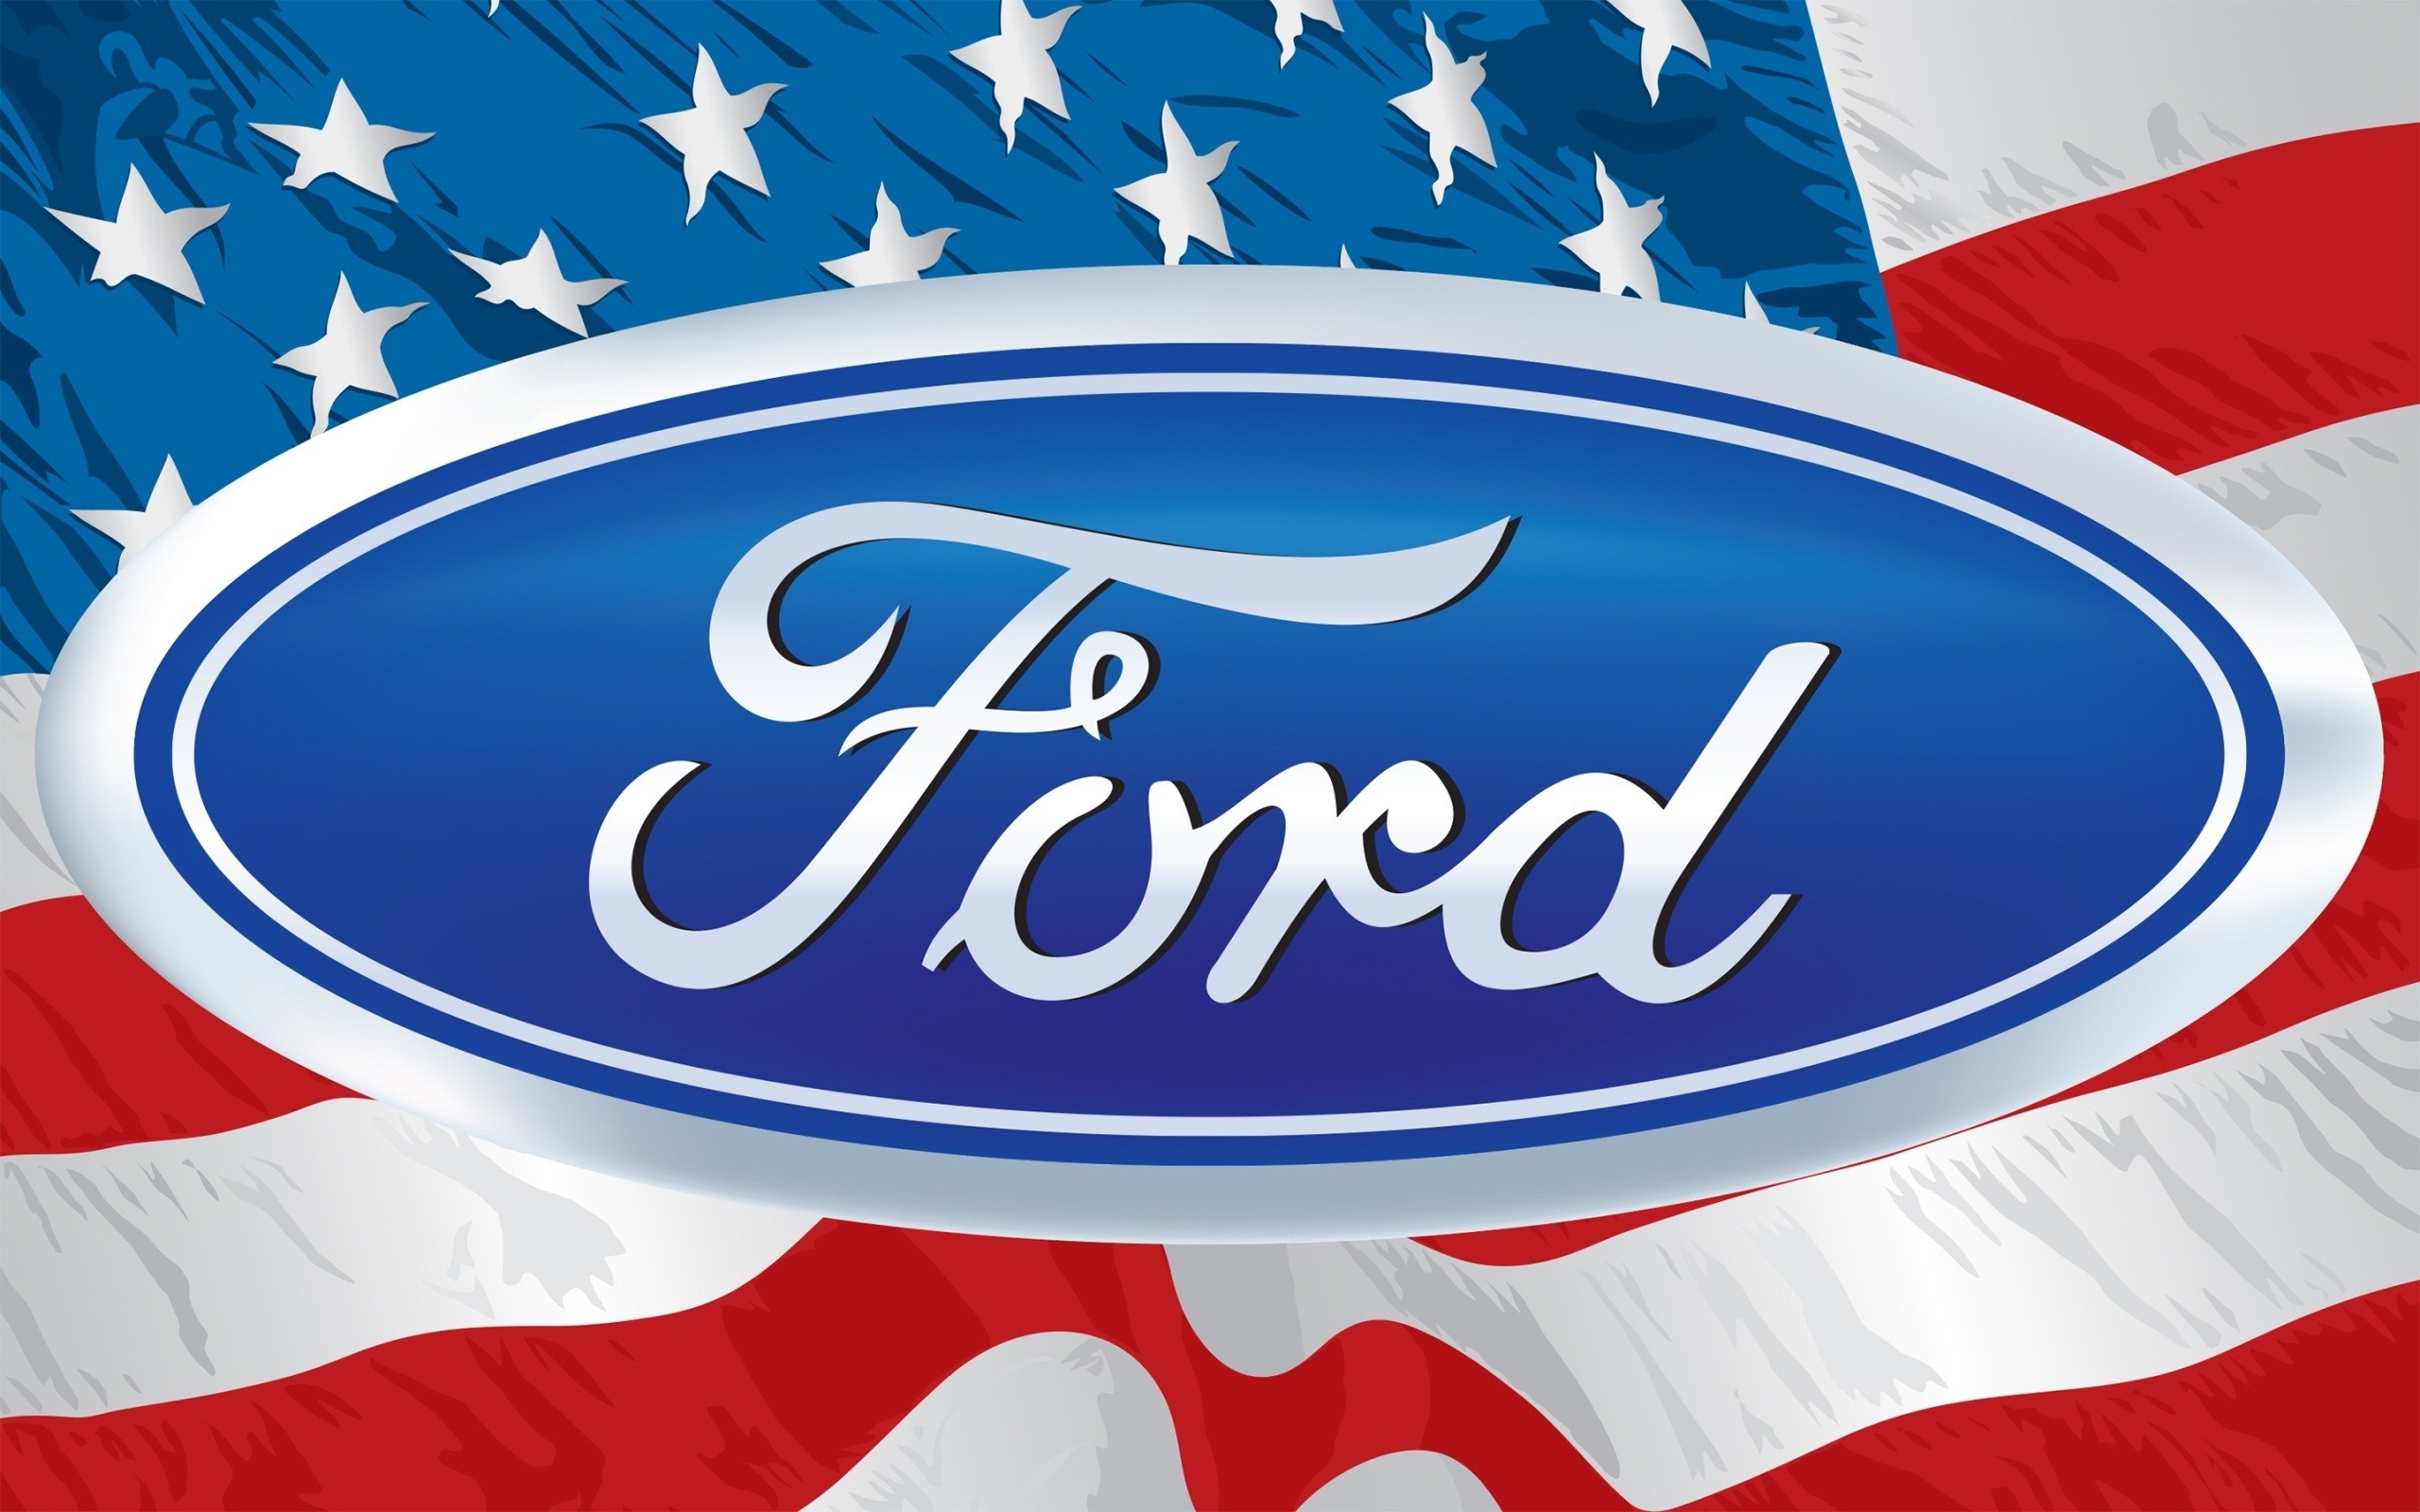 2560x1600 Wallpapers of the international car brand Ford, Ford is really popular in  America